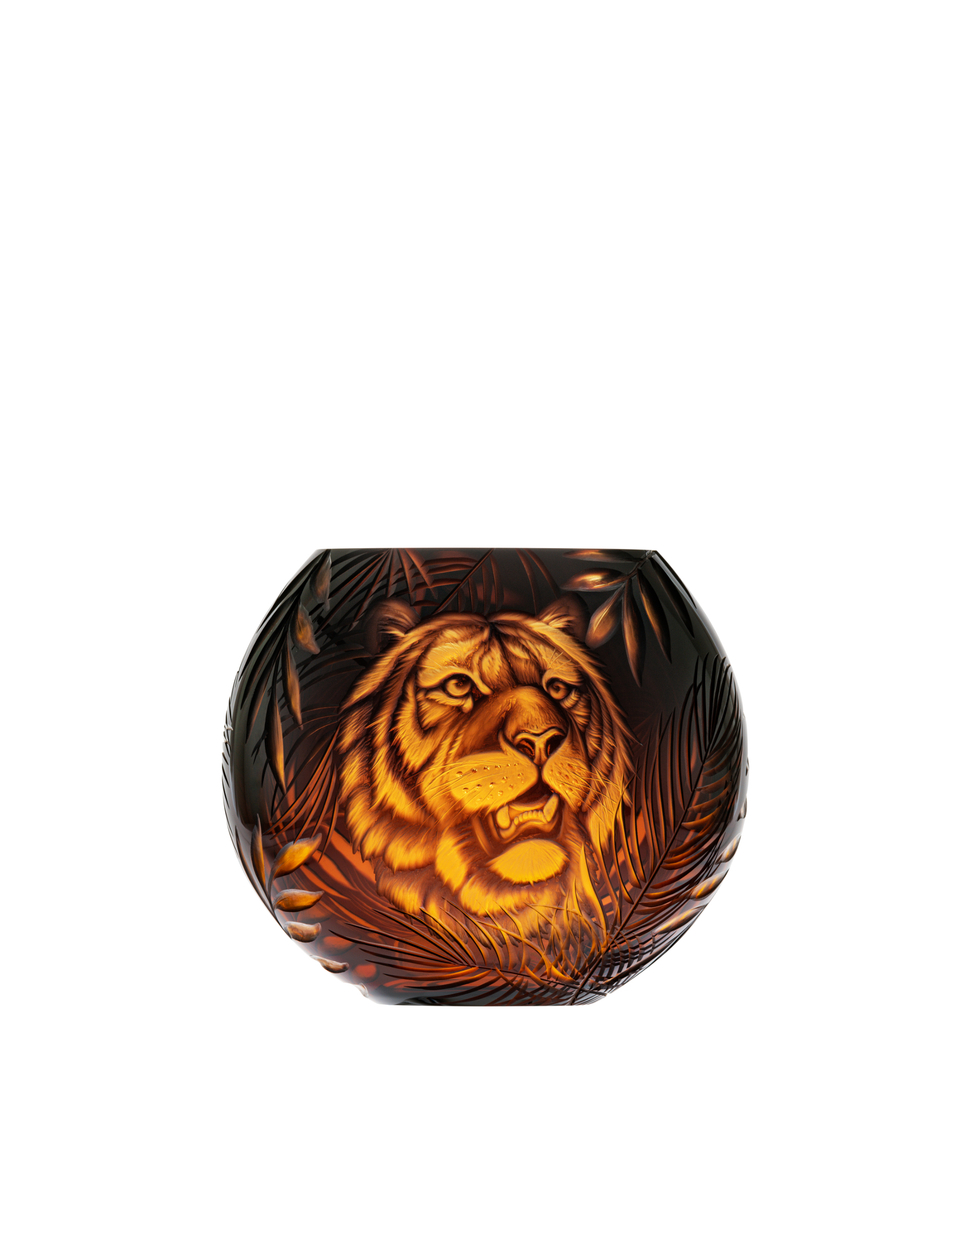 Beauty vase with tiger engraving, 13 cm